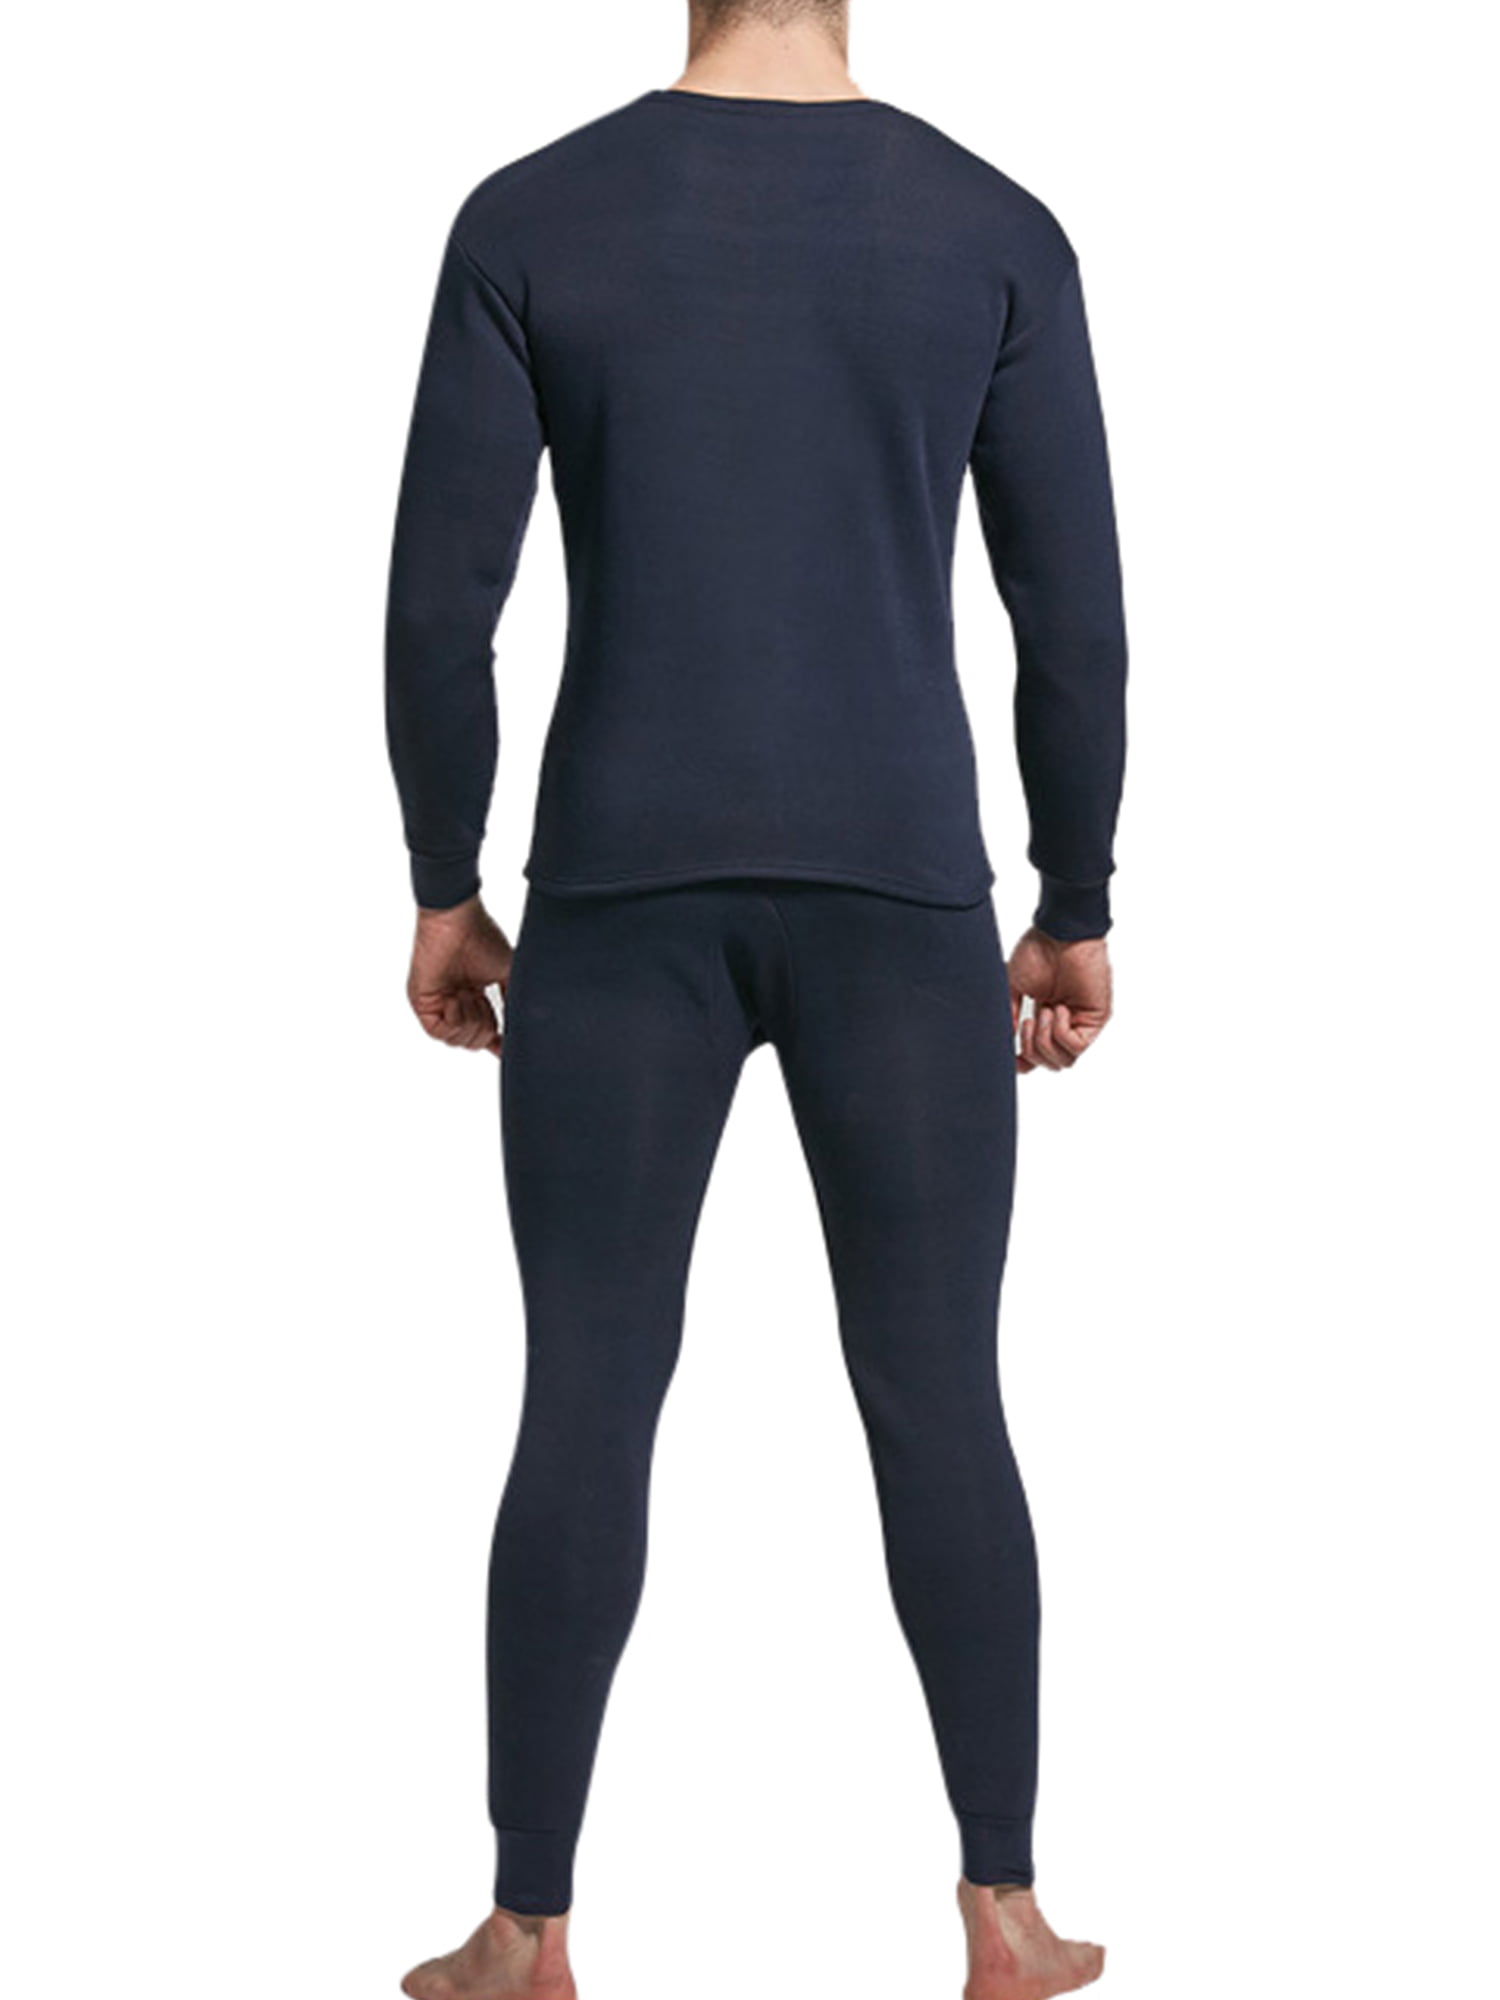 XL Mens Outdoor Base Layer Long Johns in Black L M 